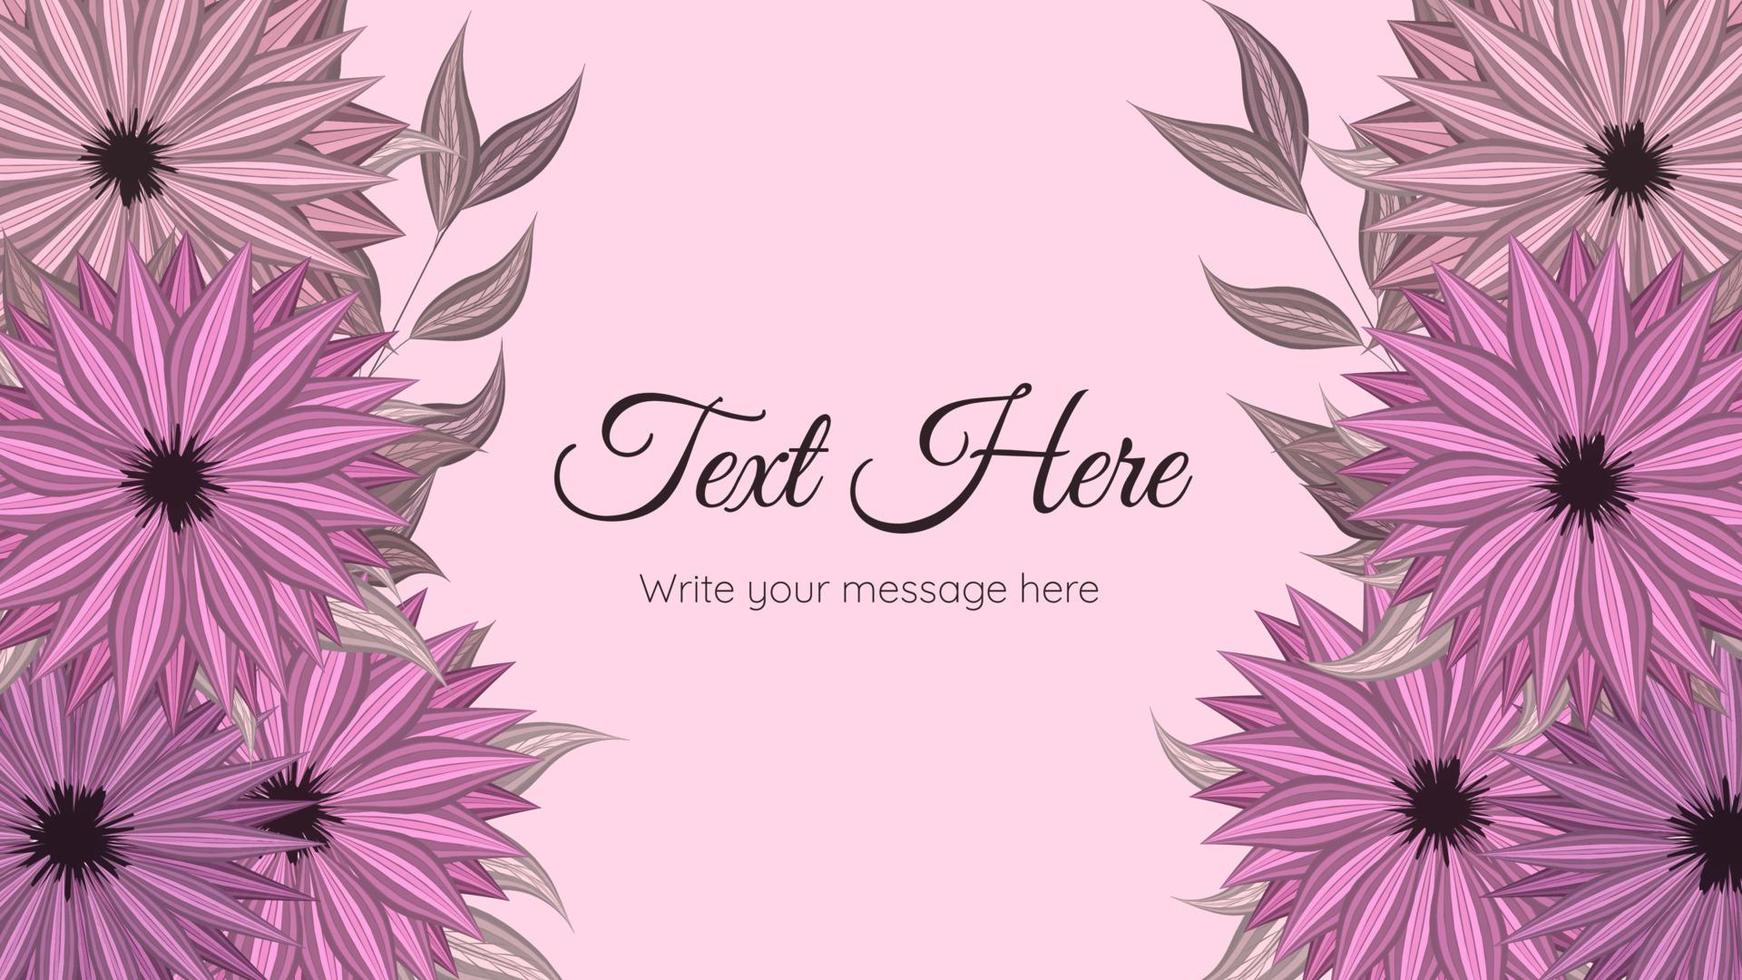 Elegant floral background template with flowers, web, social media vector